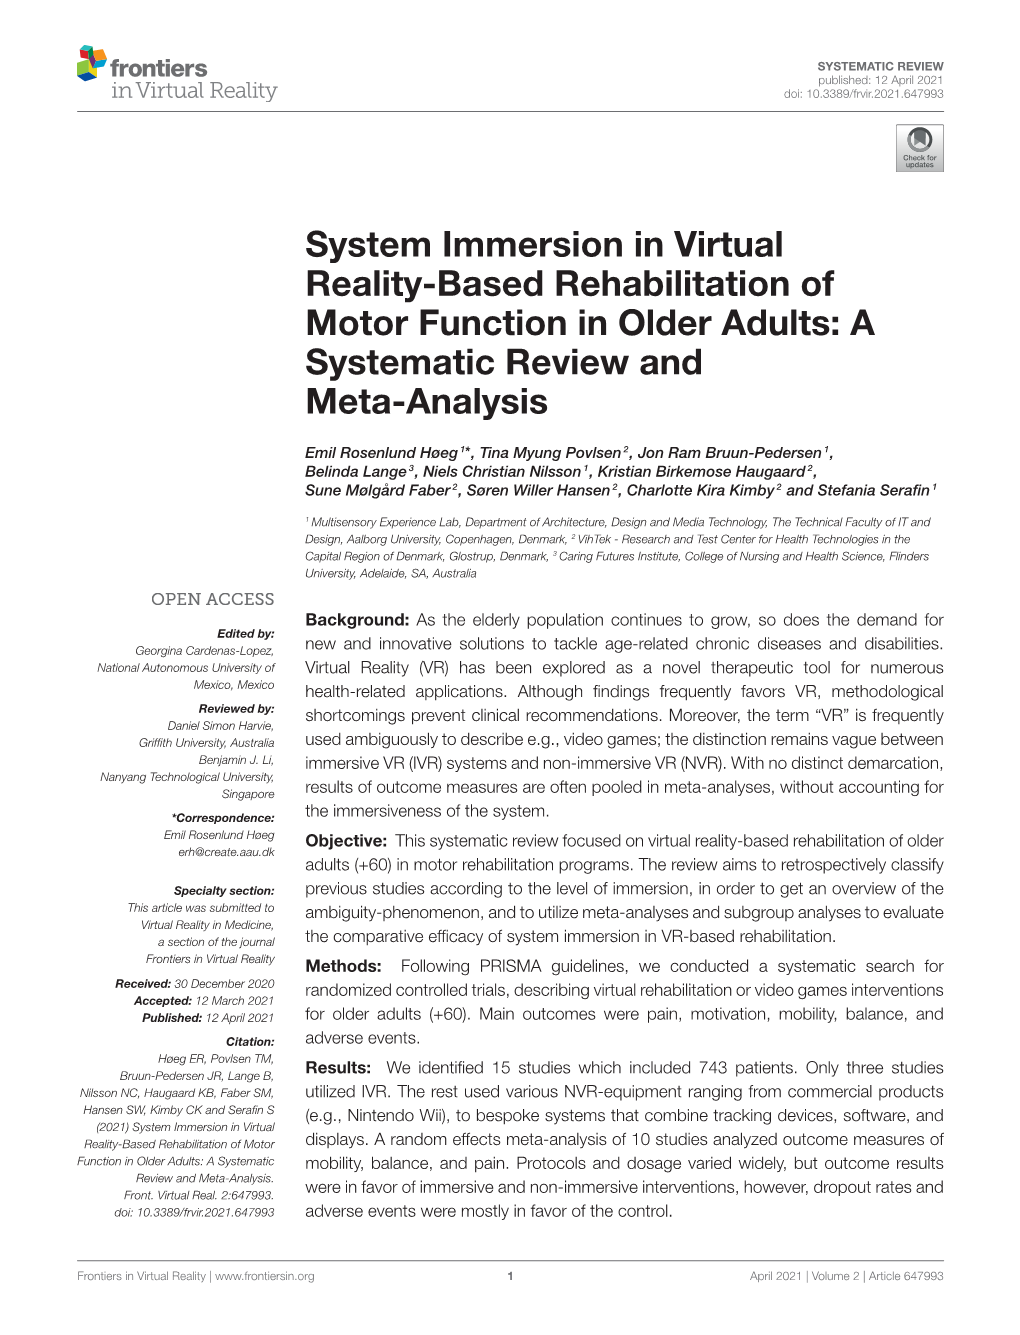 System Immersion in Virtual Reality-Based Rehabilitation of Motor Function in Older Adults: a Systematic Review and Meta-Analysis